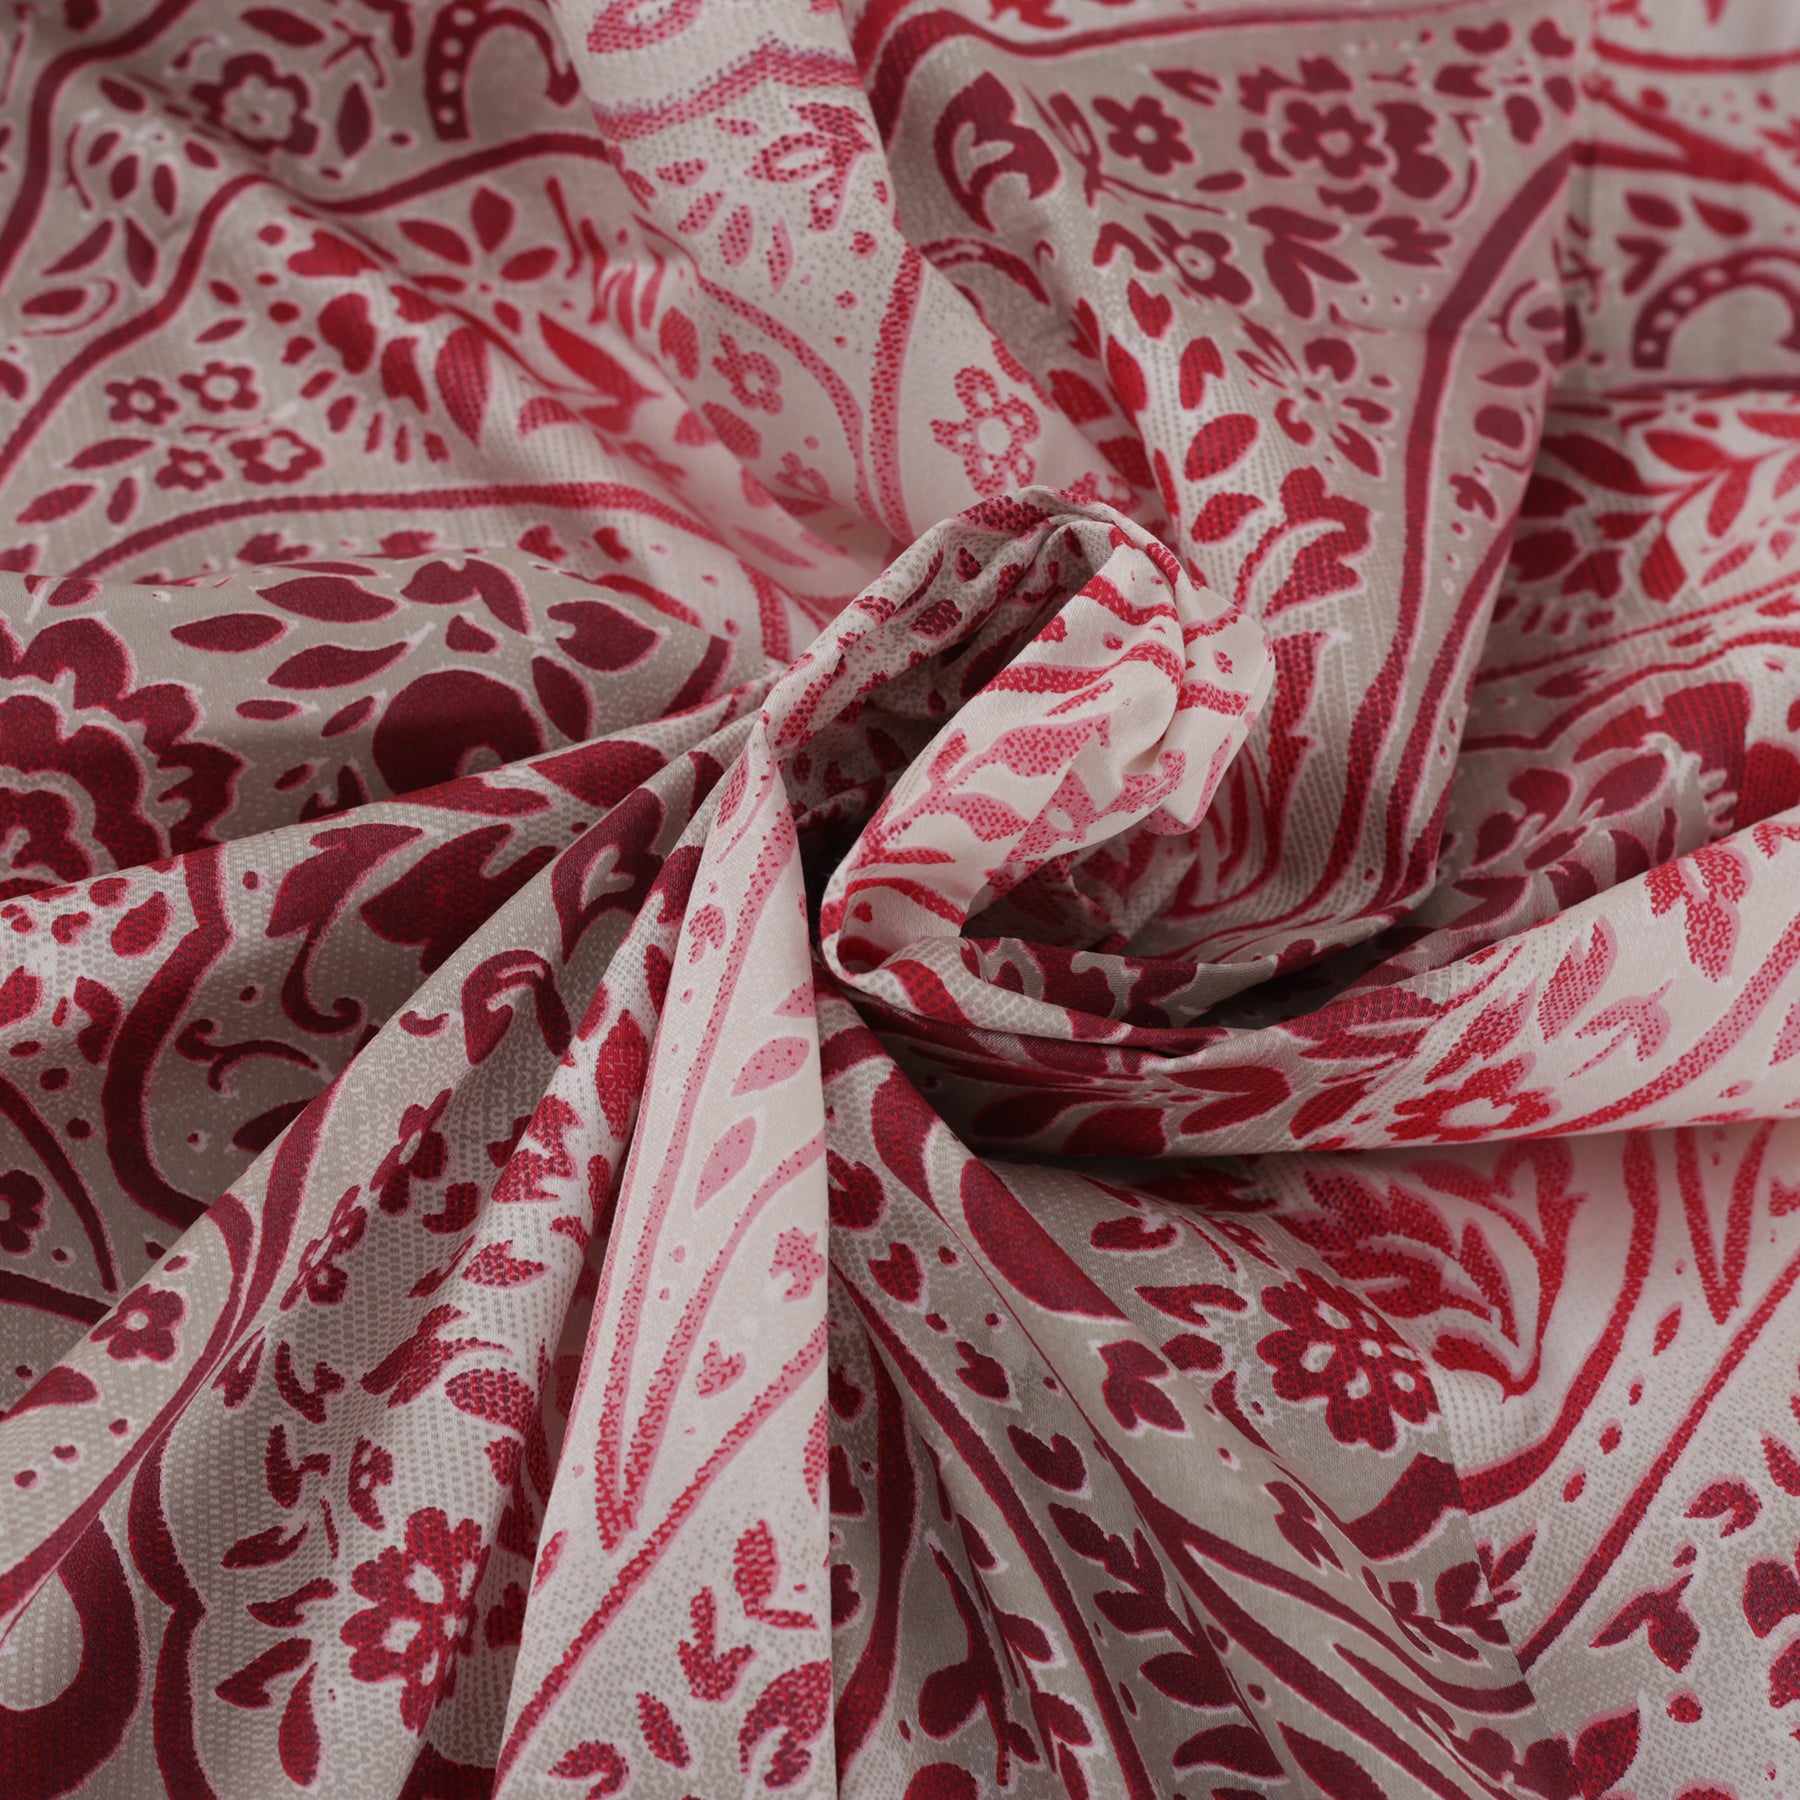 Folklore Transition Ombre Bonanza Printed 100% Cotton Red Ultra Soft Bed Sheet